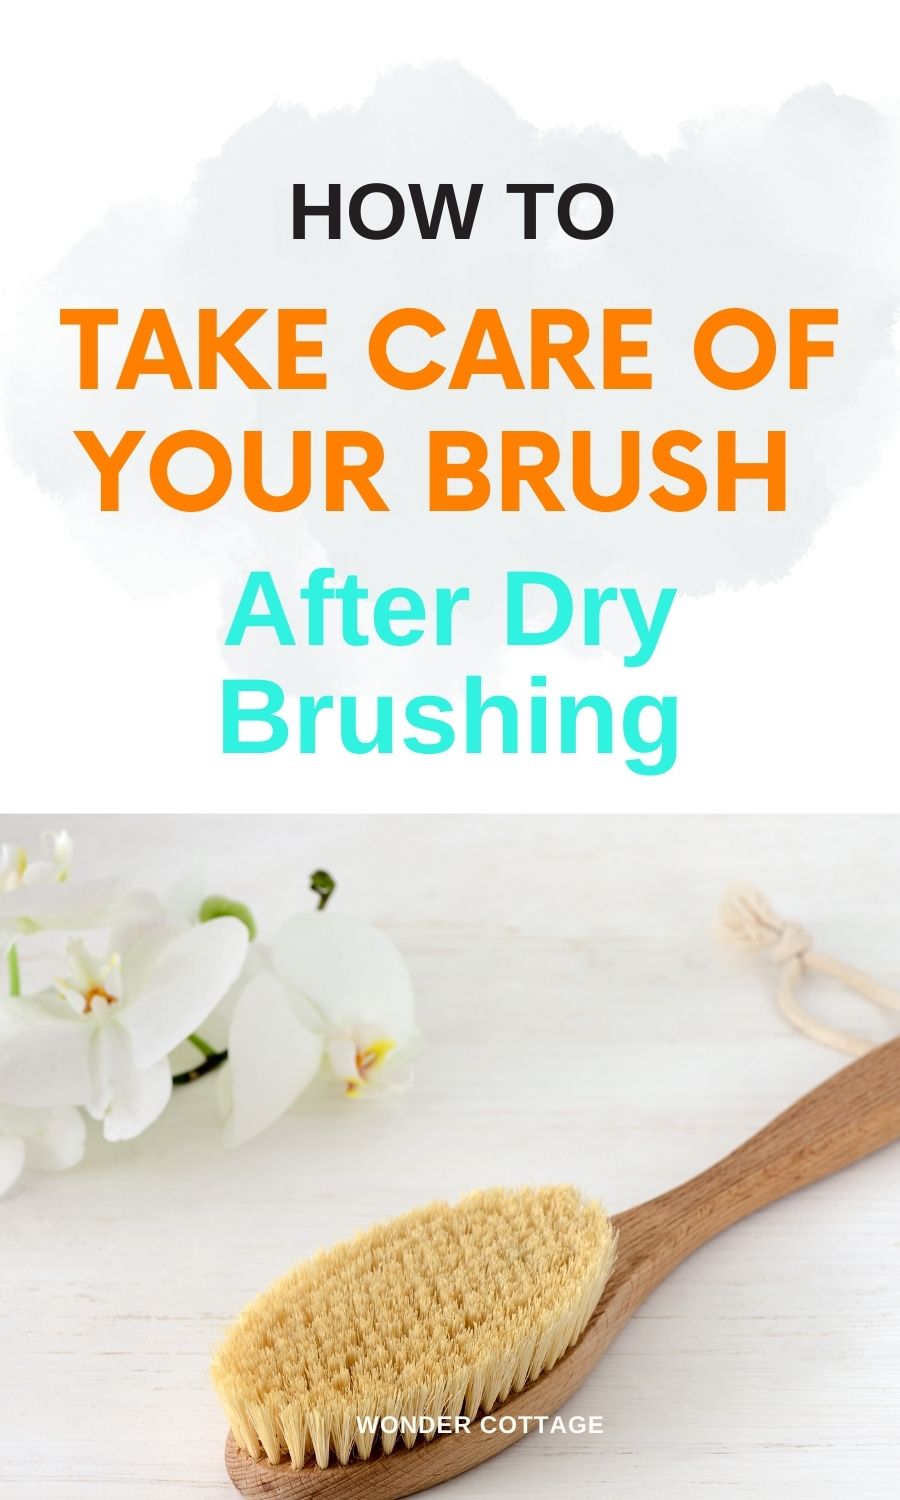 How to take care of your brush after dry brushing